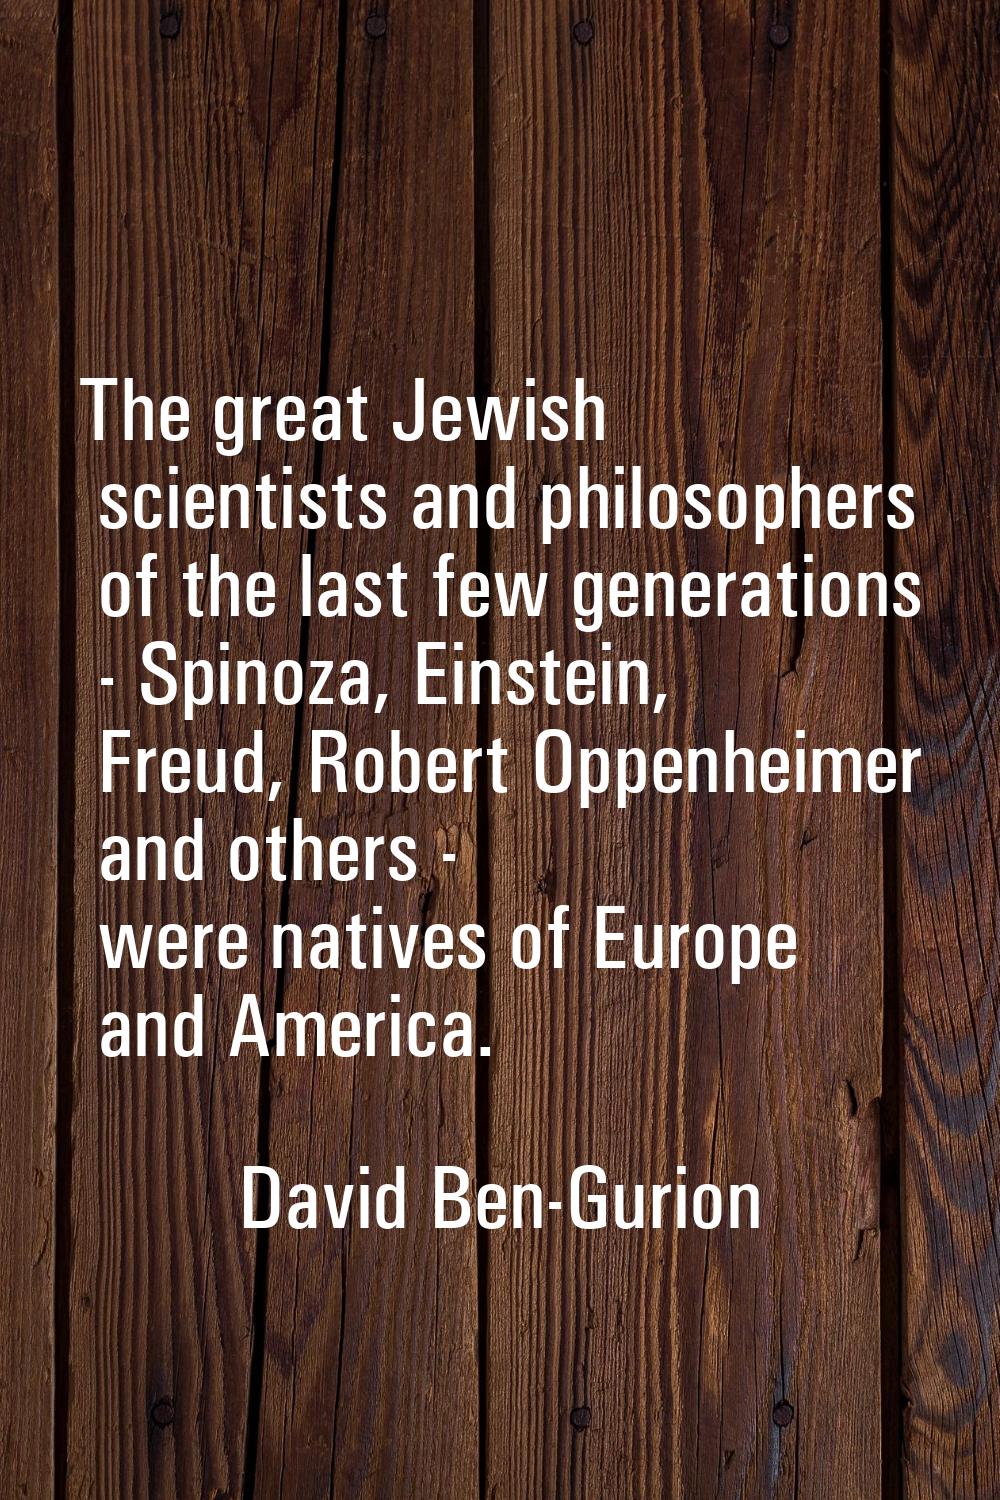 The great Jewish scientists and philosophers of the last few generations - Spinoza, Einstein, Freud